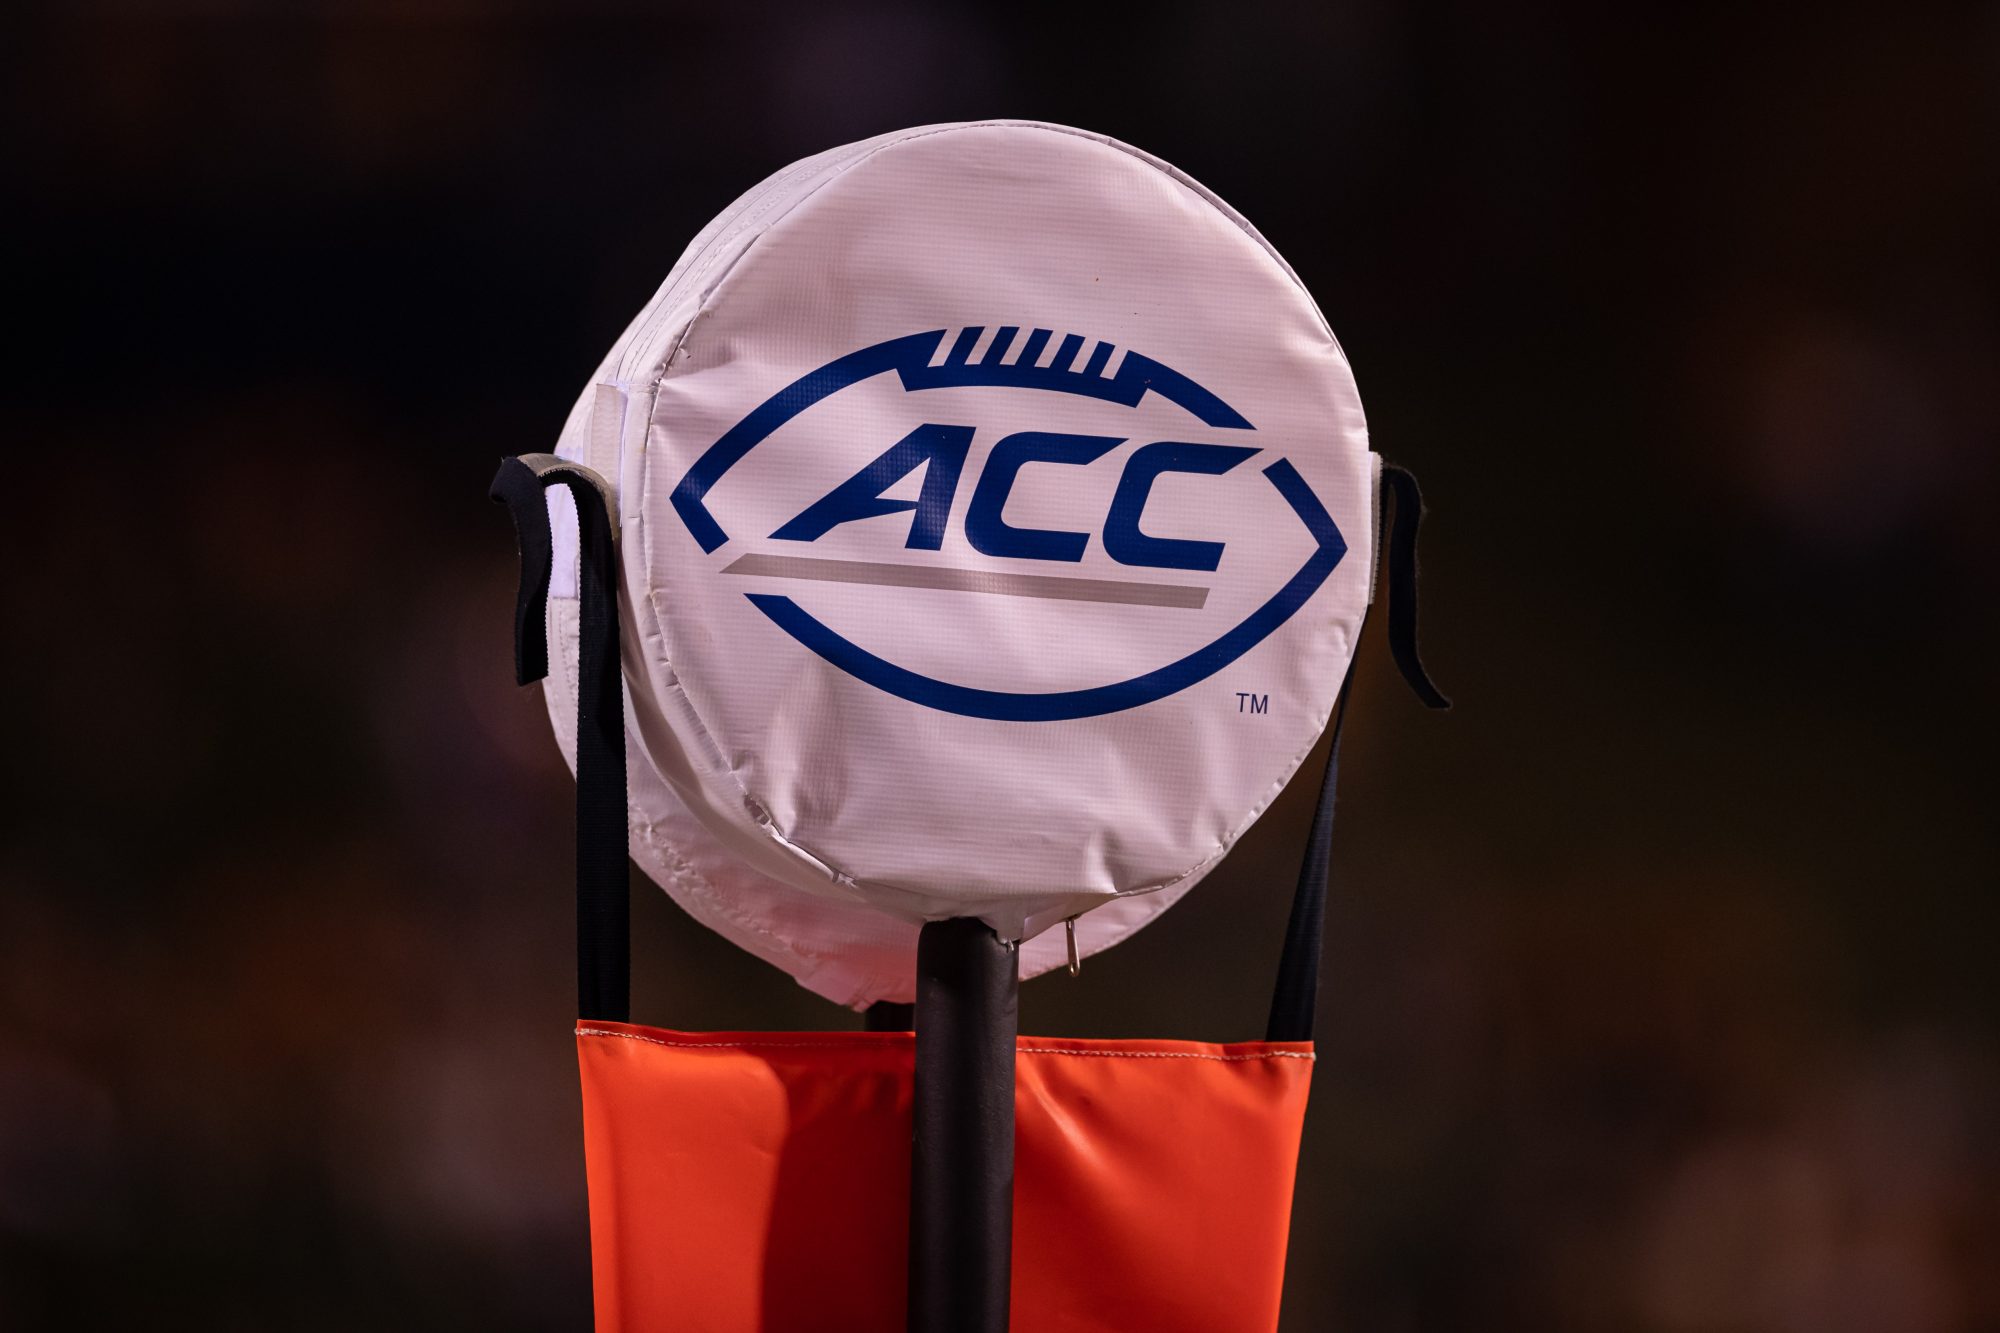 Sep 4, 2021; Charlottesville, Virginia, USA; A detailed view of the ACC logo on the down marker used during the game between William & Mary Tribe and the Virginia Cavaliers at Scott Stadium.